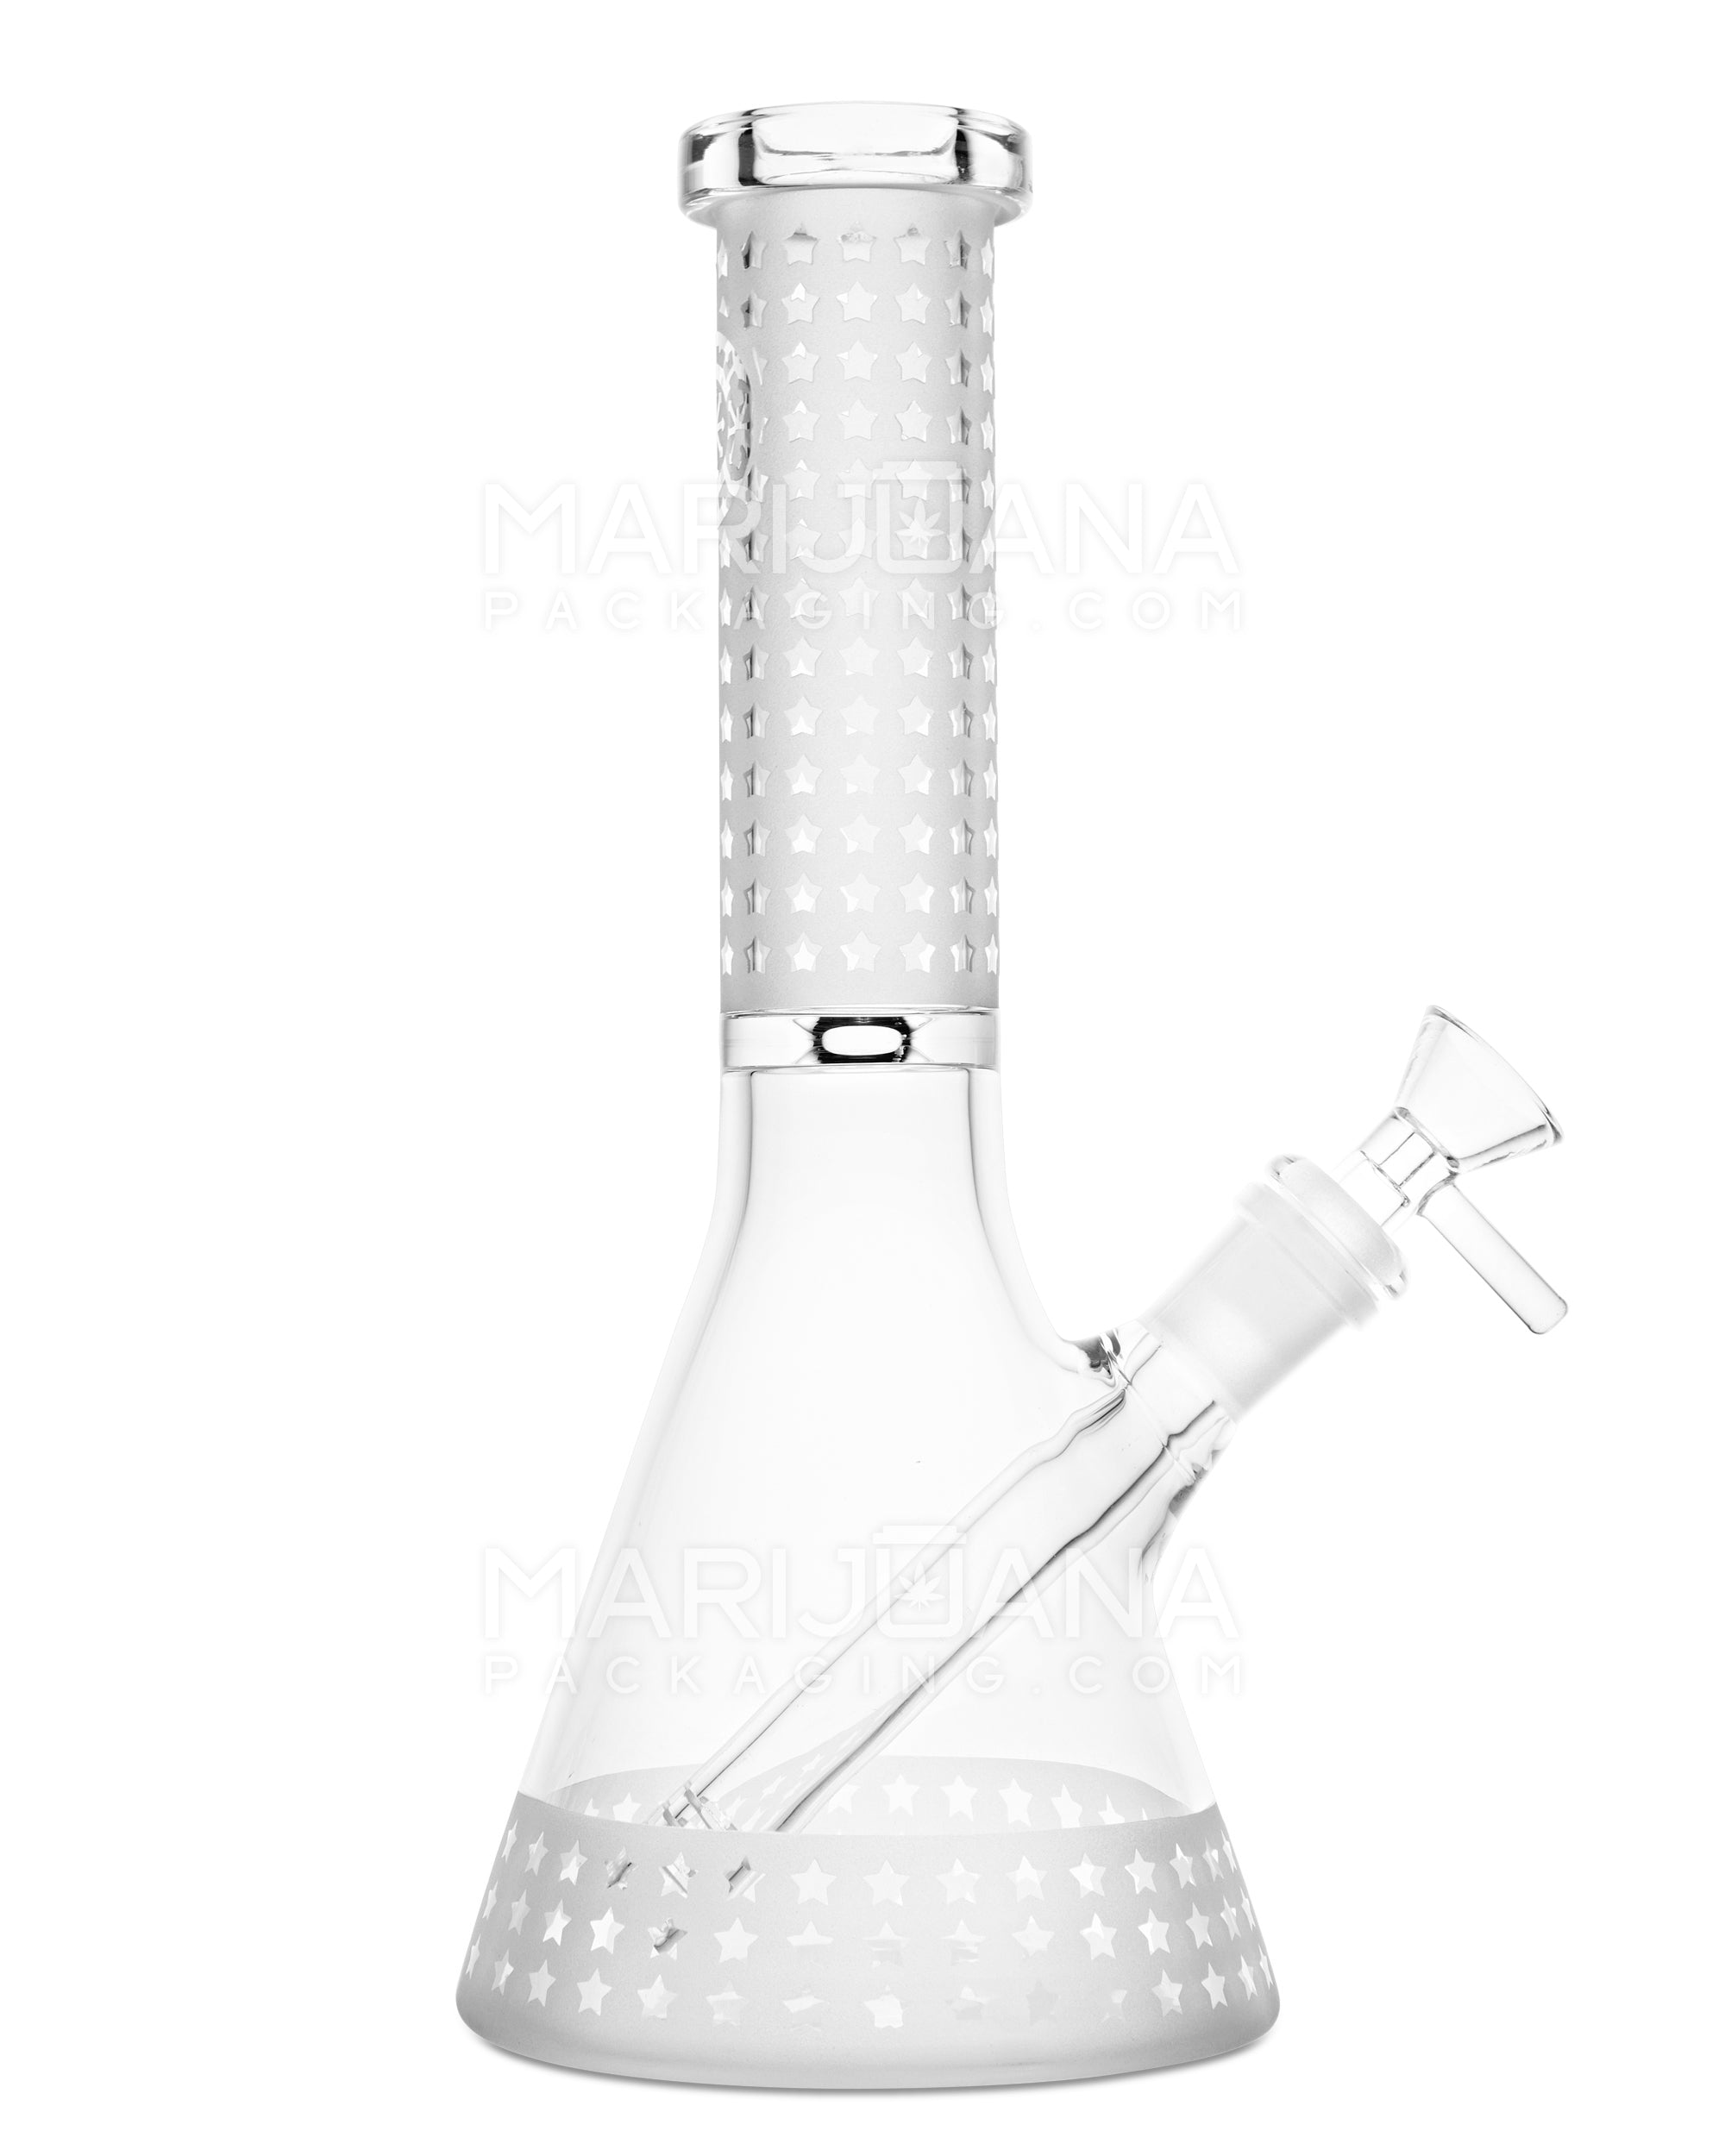 Straight Neck Sandblasted Stars Decal Glass Beaker Water Pipe | 10.5in Tall - 14mm Bowl - Clear - 1